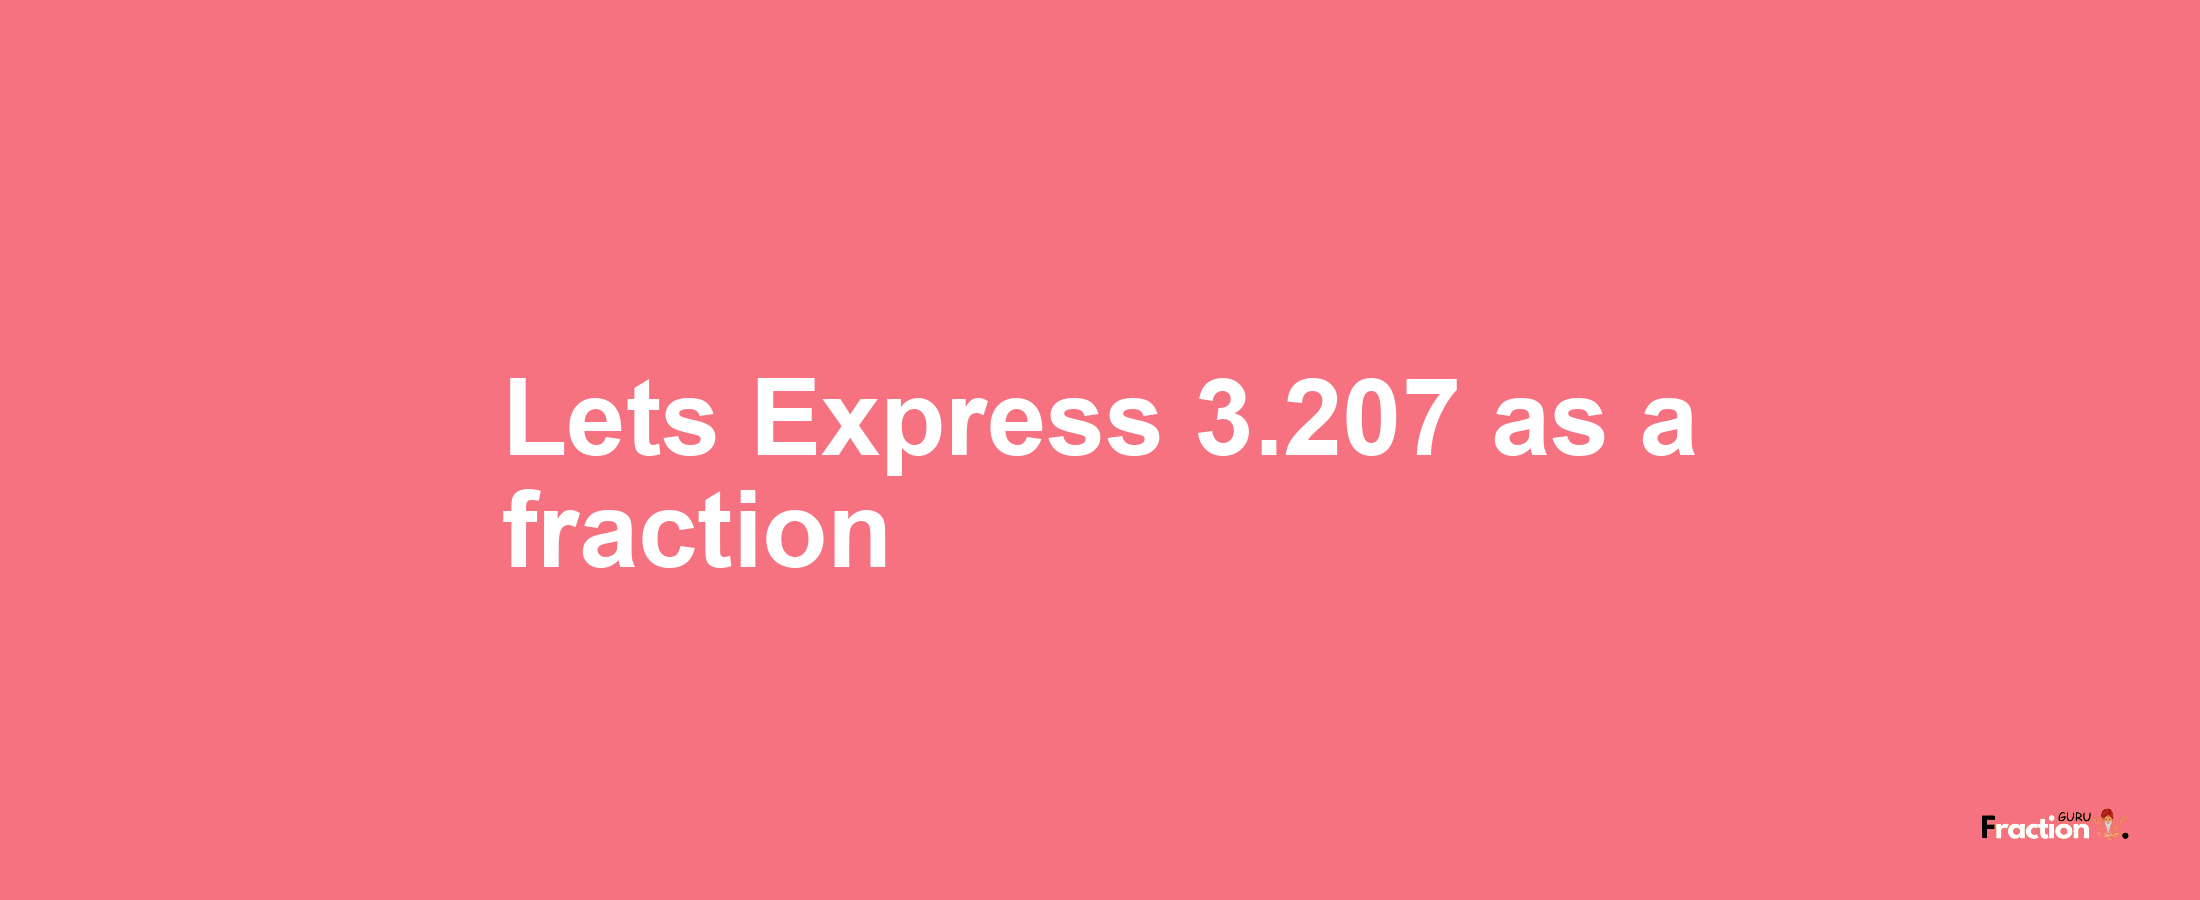 Lets Express 3.207 as afraction